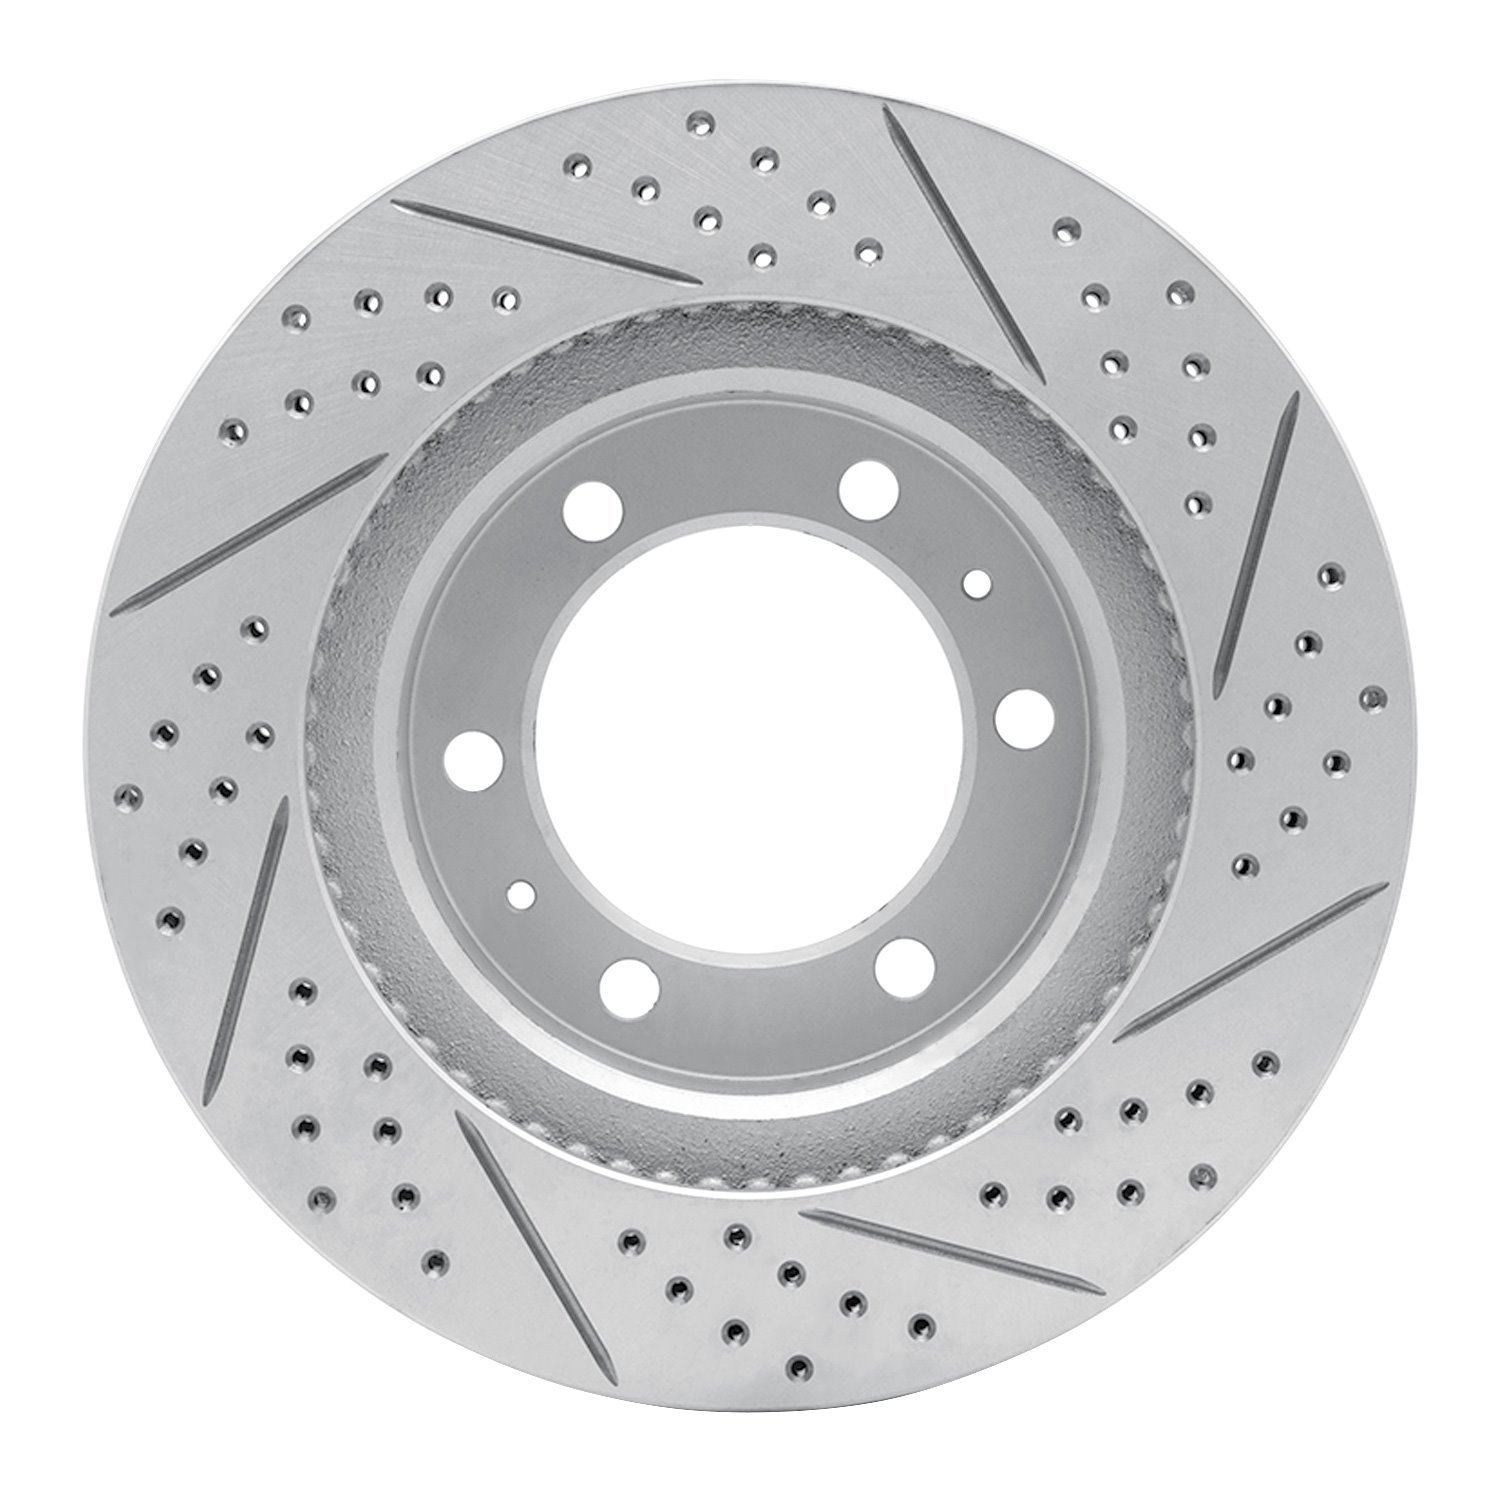 830-76128L Geoperformance Drilled/Slotted Brake Rotor, Fits Select Lexus/Toyota/Scion, Position: Front Left